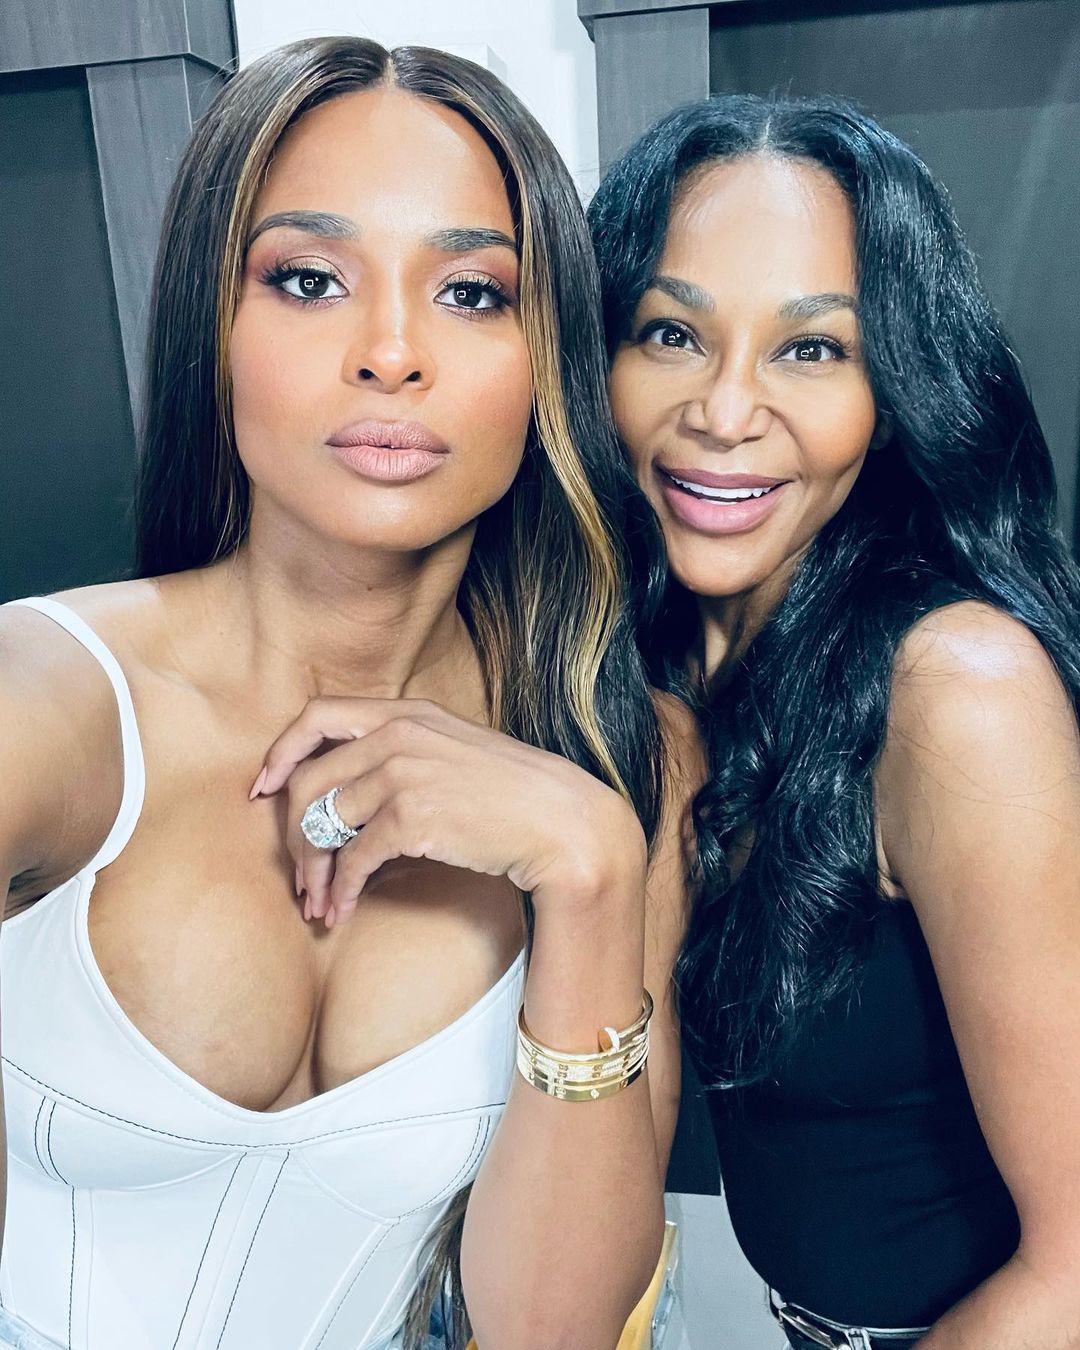 Happy Birthday to my Bestie and Best makeup artist in the world @YolondaFrederick! I’m so grateful for you! I love you so much! I’m so excited for all the more amazingness God has in store for you! You inspire me! #20yrsDeep  #HBD❤️